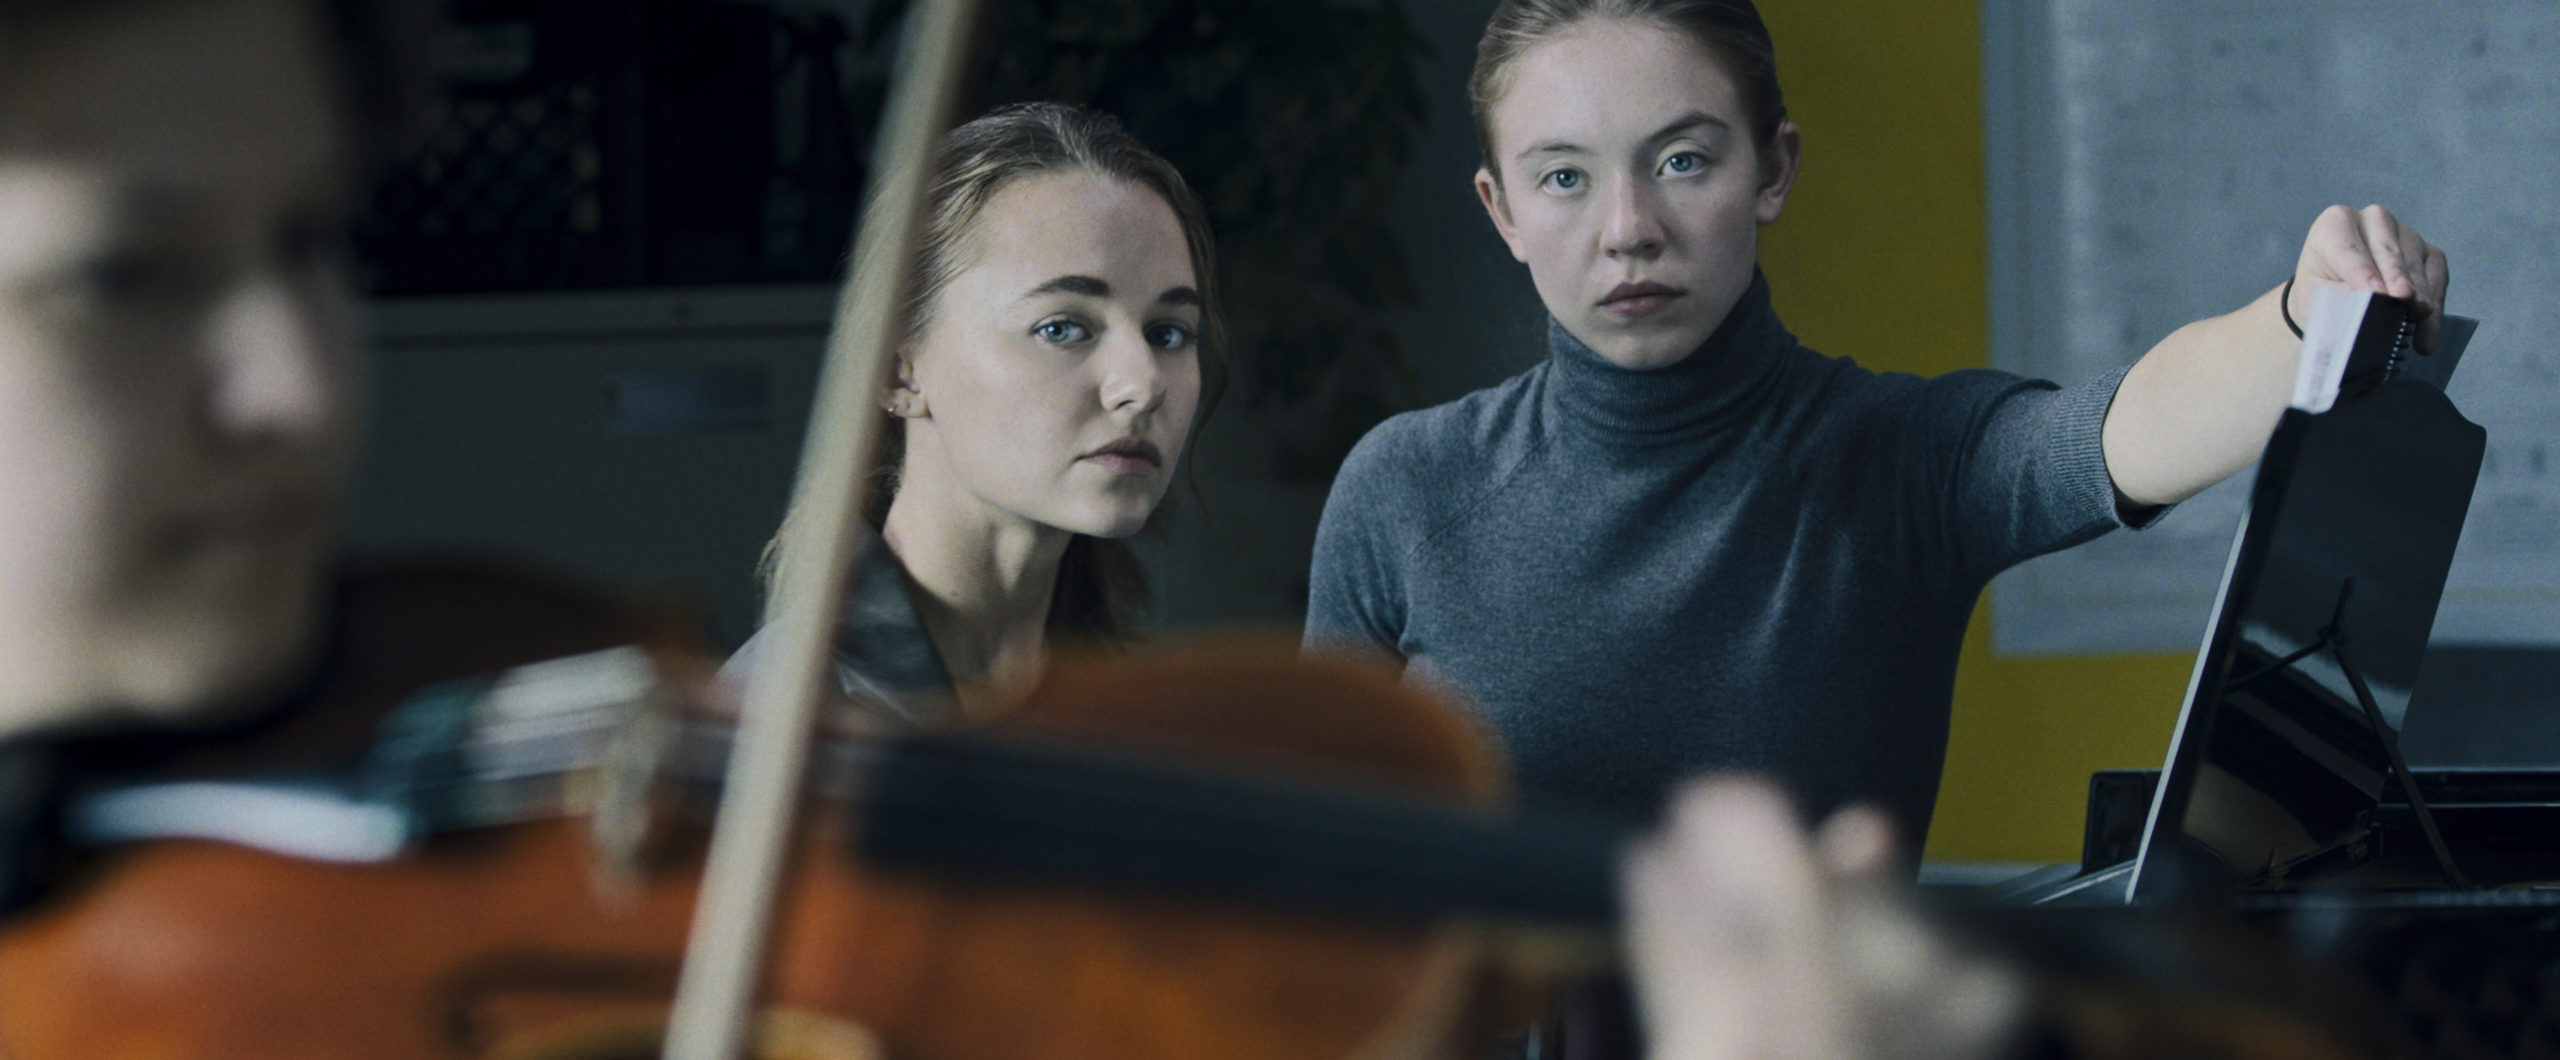 Vivian (Madison Iseman) practices while Juliet (Sydney Sweeney) turns the pages and dies inside in Nocturne. (Image: Amazon Studios)